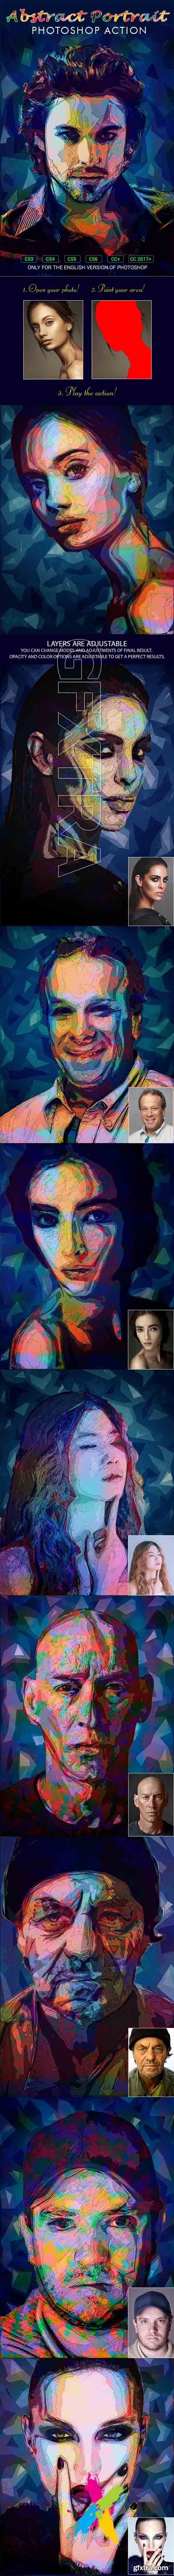 GraphicRiver - Abstract Portrait Photoshop Action 20362867